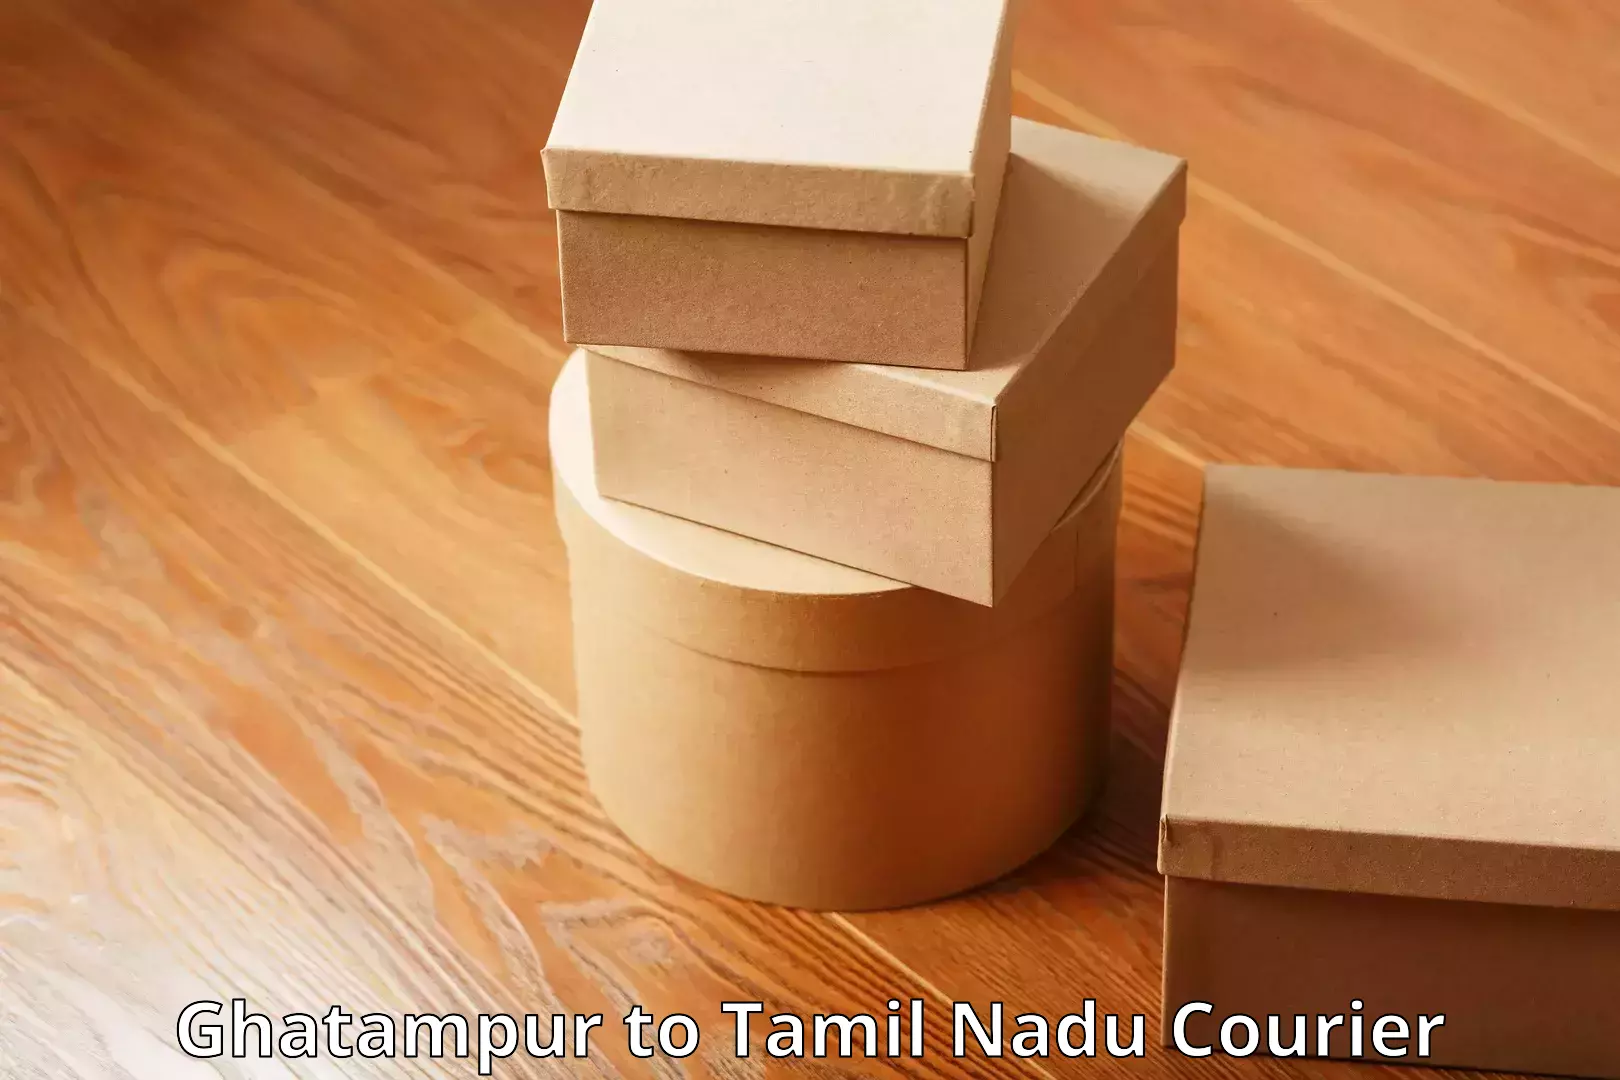 Hassle-free luggage shipping in Ghatampur to Tamil Nadu